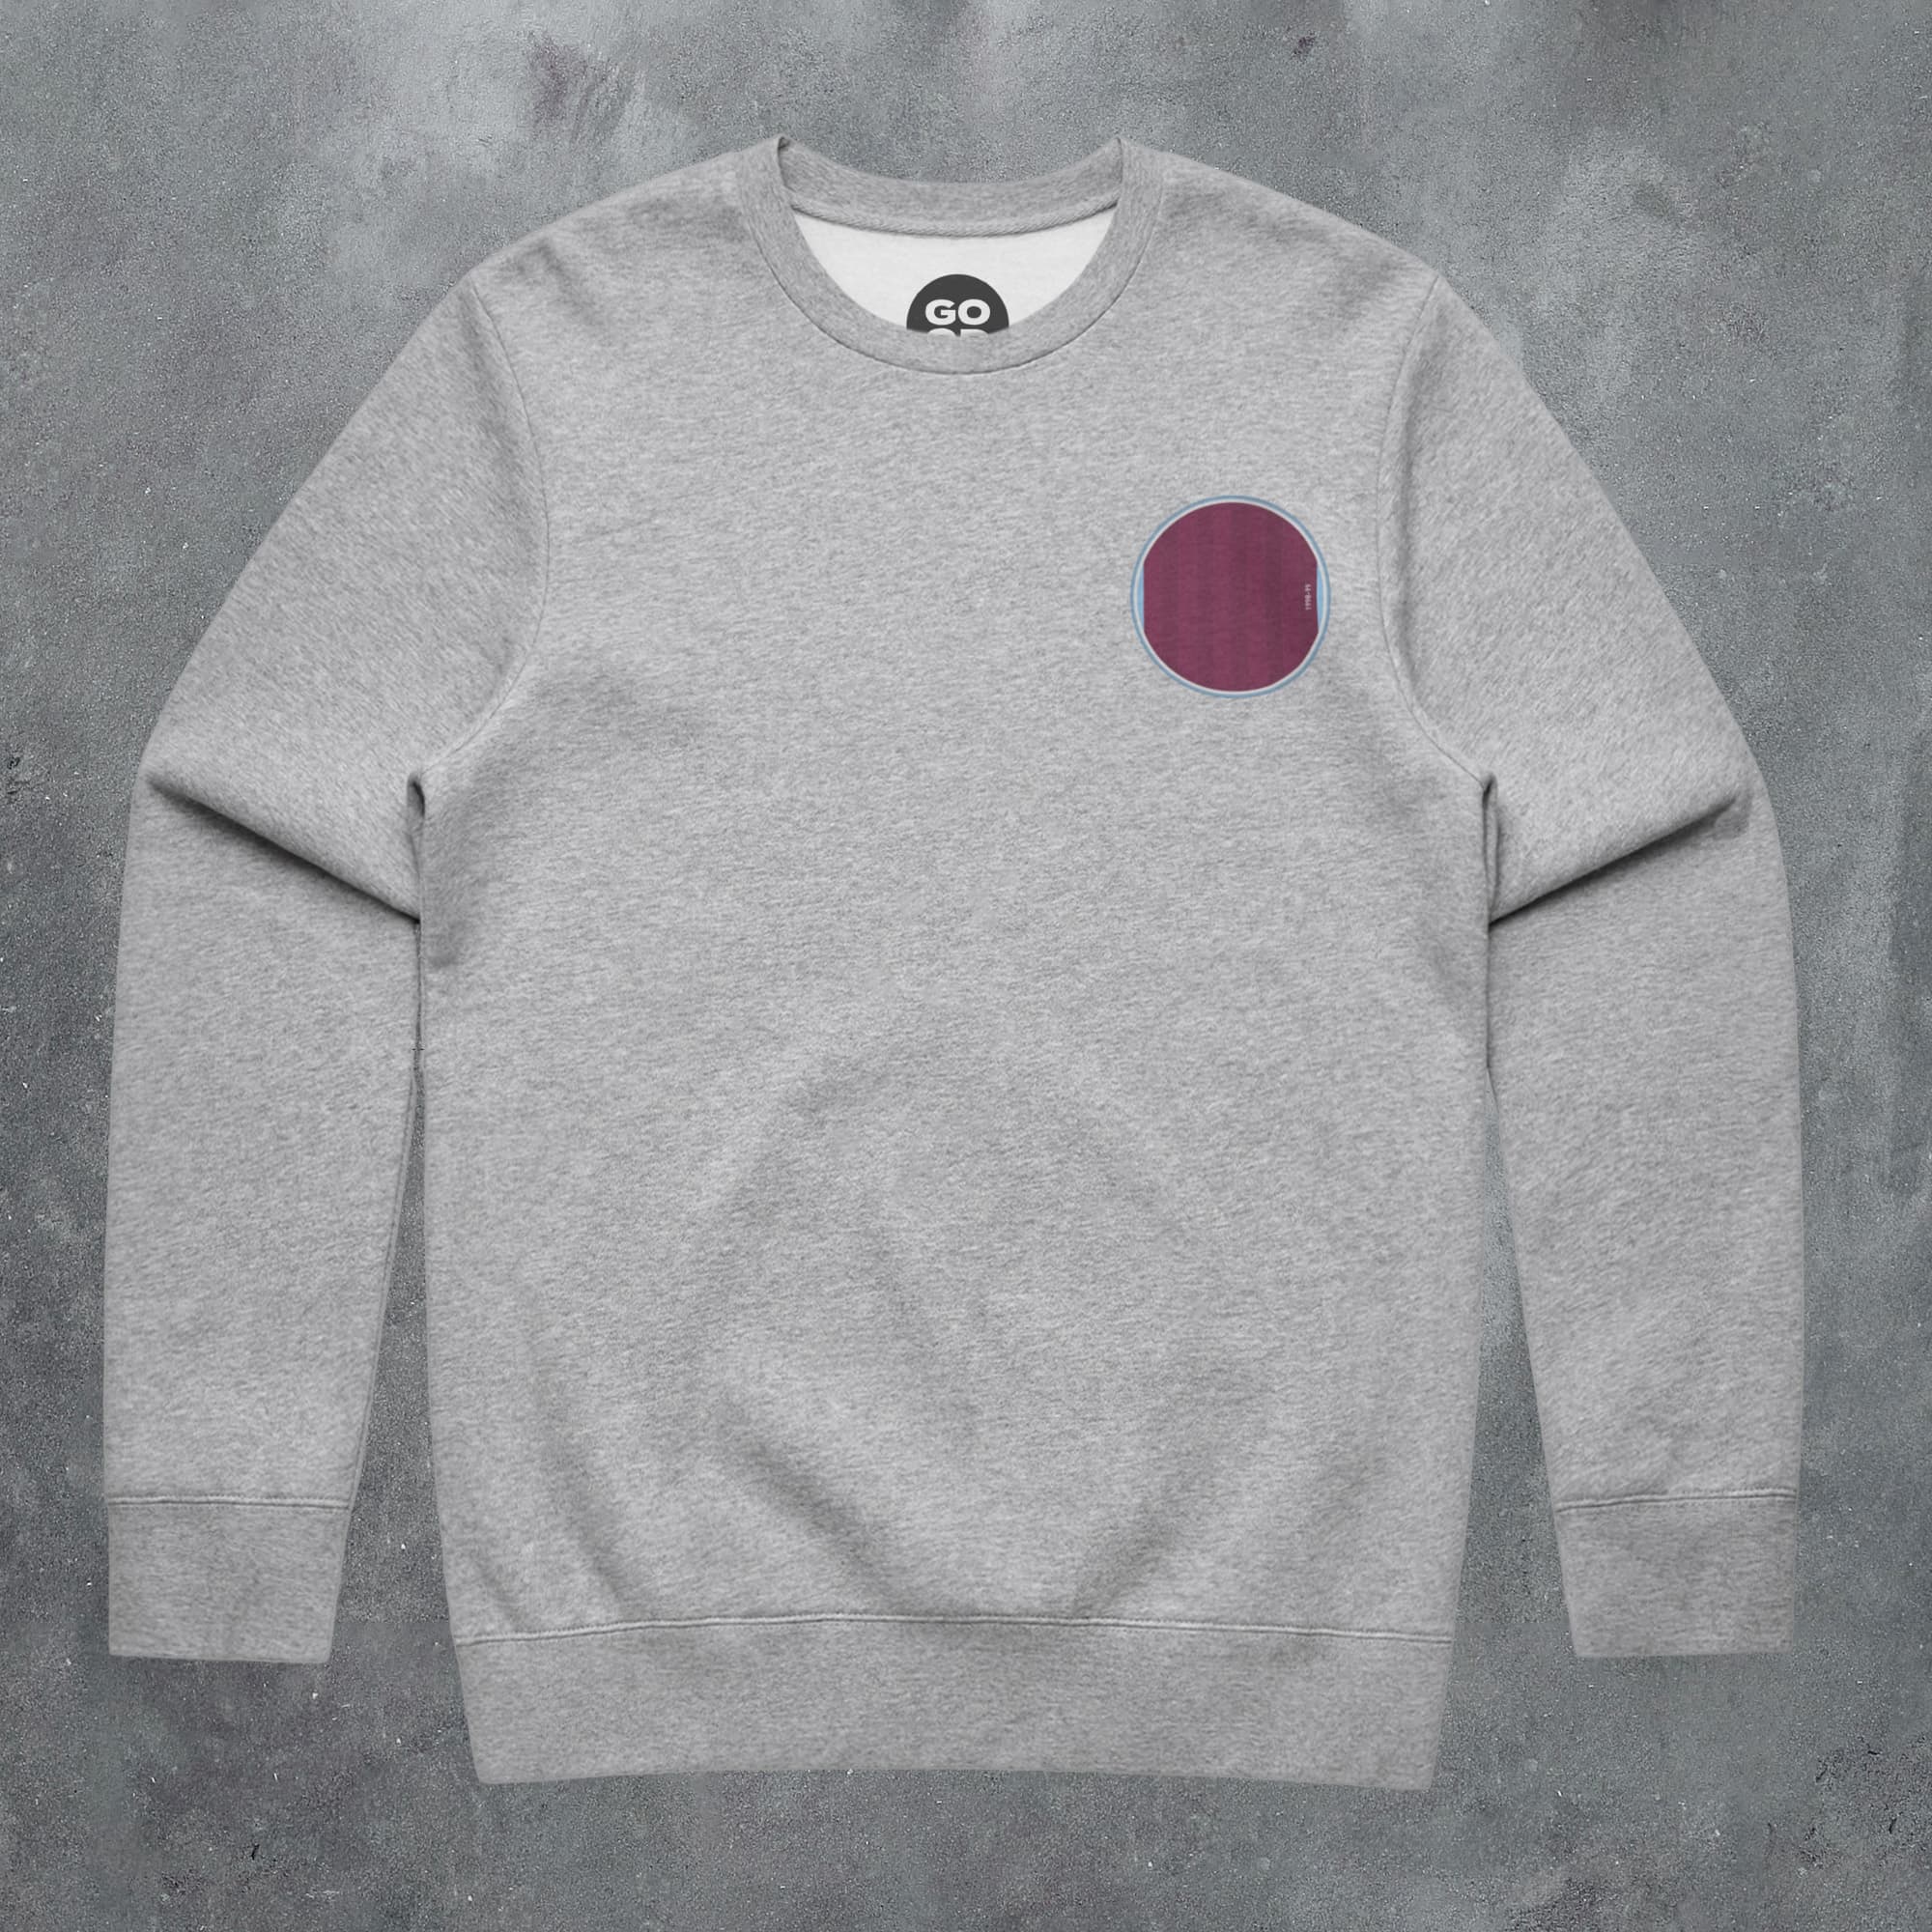 a grey sweatshirt with a red circle on the front